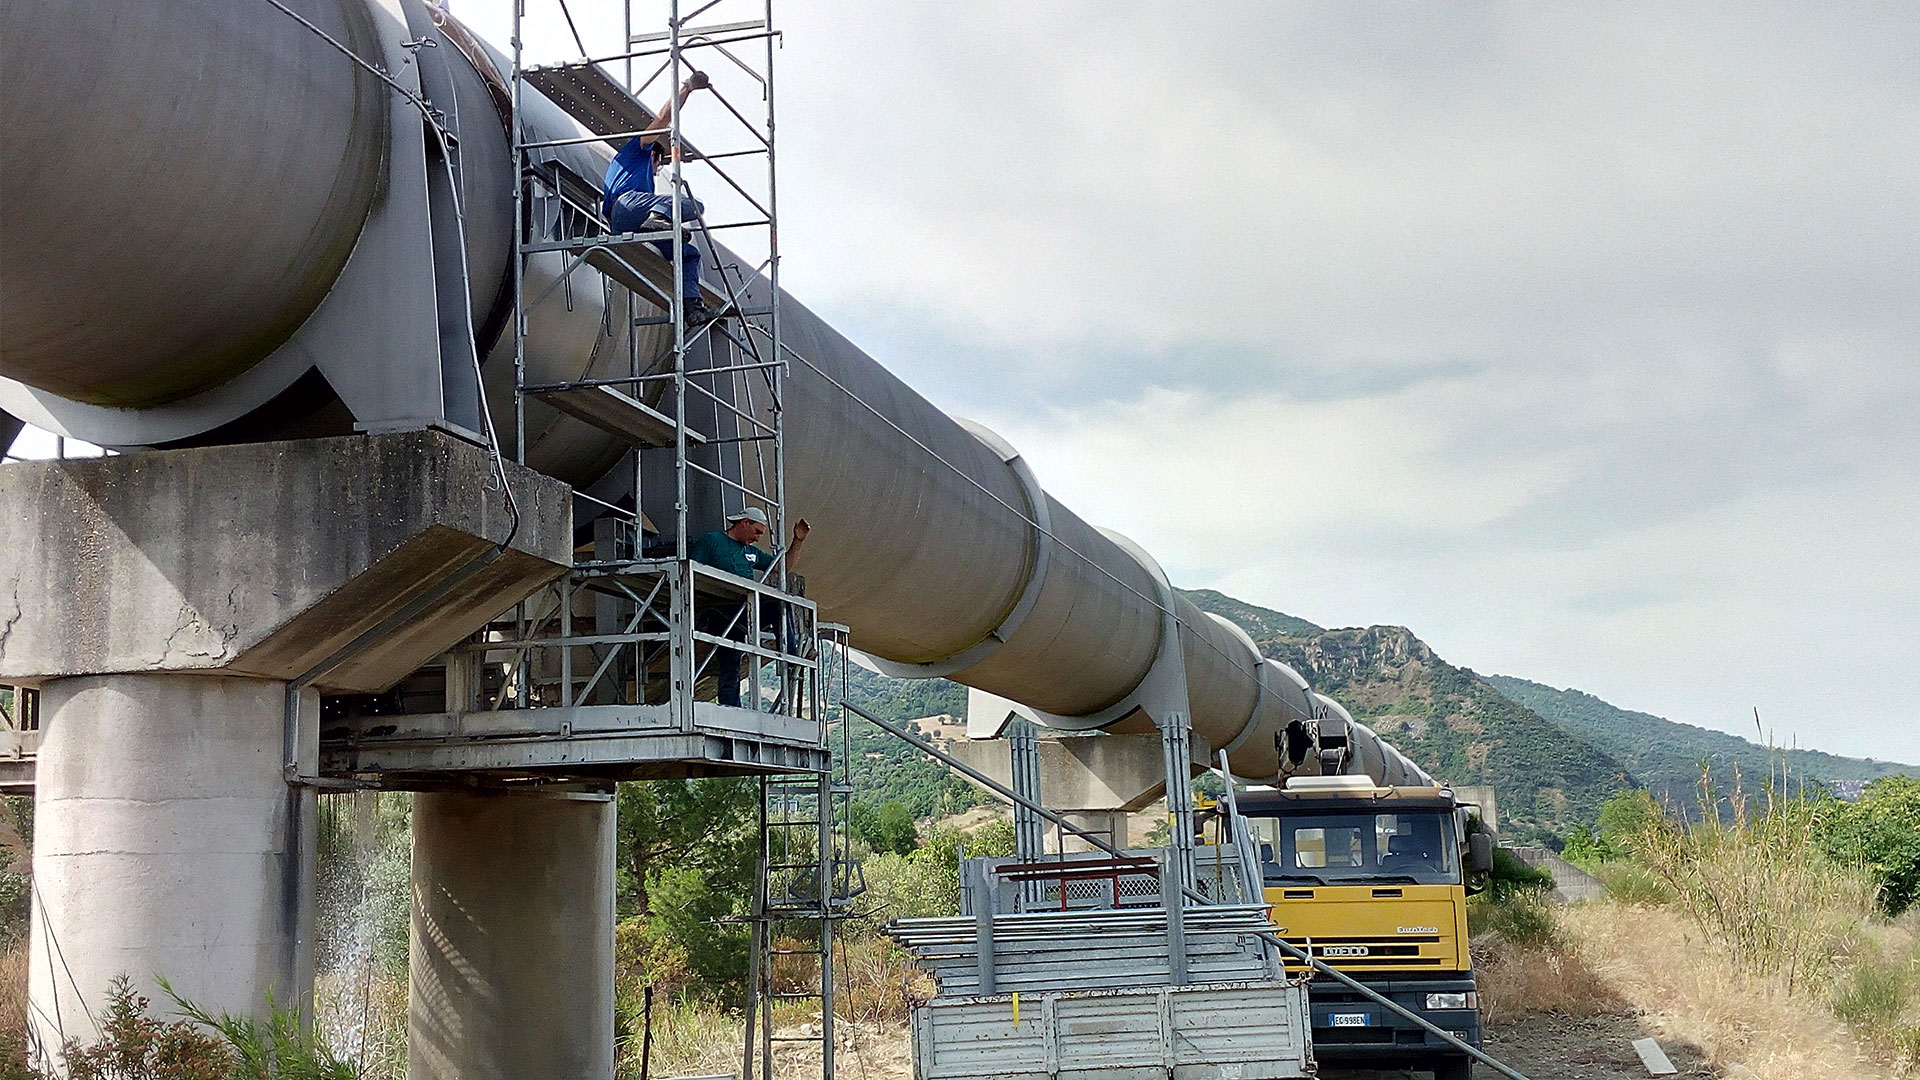 Hydro Stop socket encapsulation collars were used for repairing eight leaks on the biggest pipeline in Southern Italy